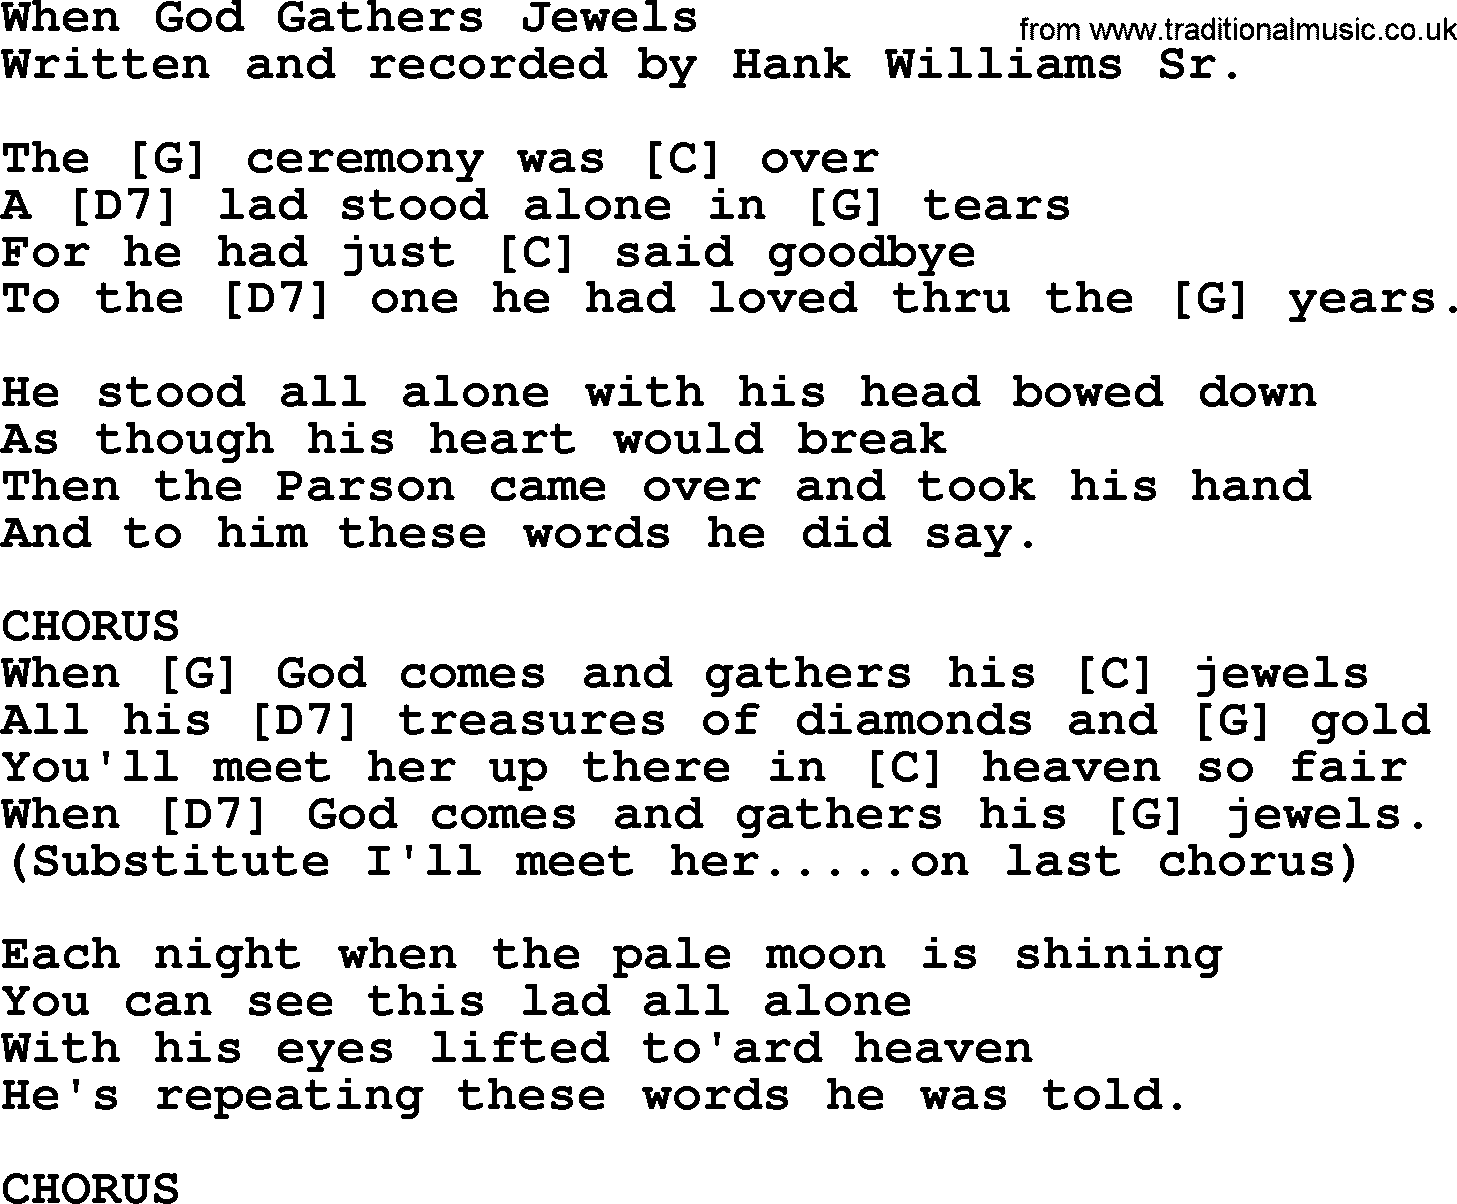 Hank Williams song When God Gathers Jewels, lyrics and chords